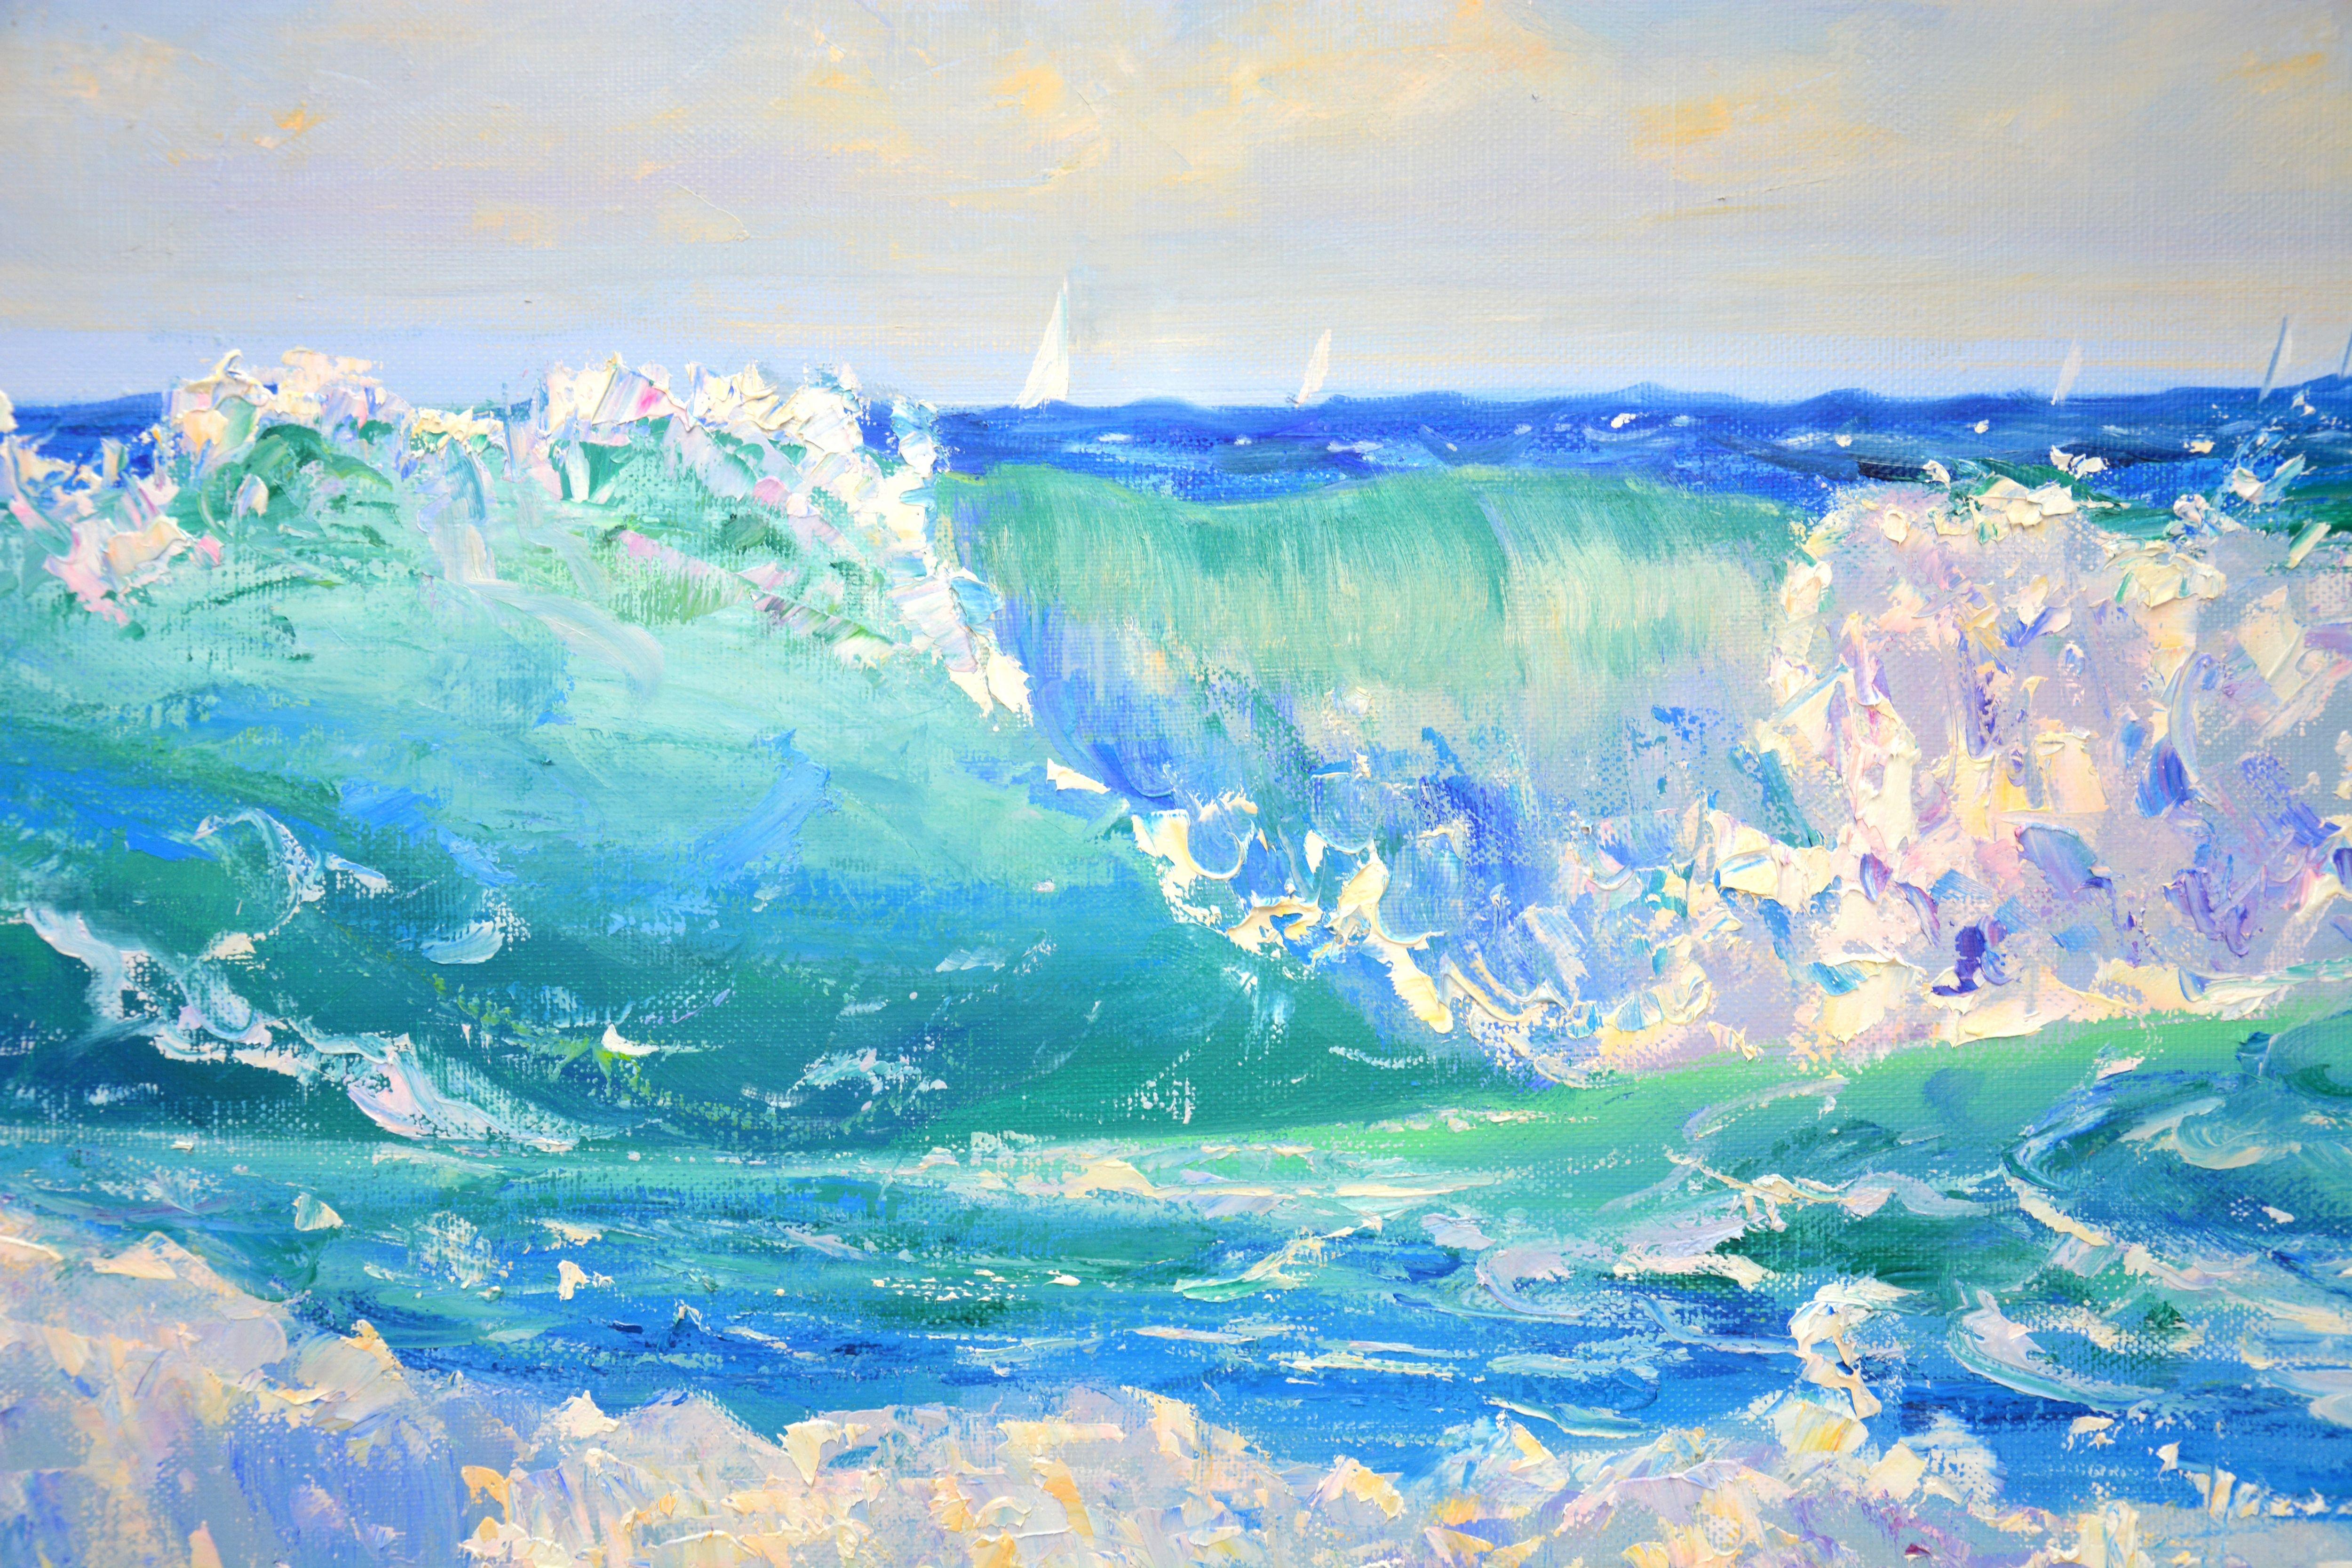 Ocean waves. Sailboats., Painting, Oil on Canvas 2